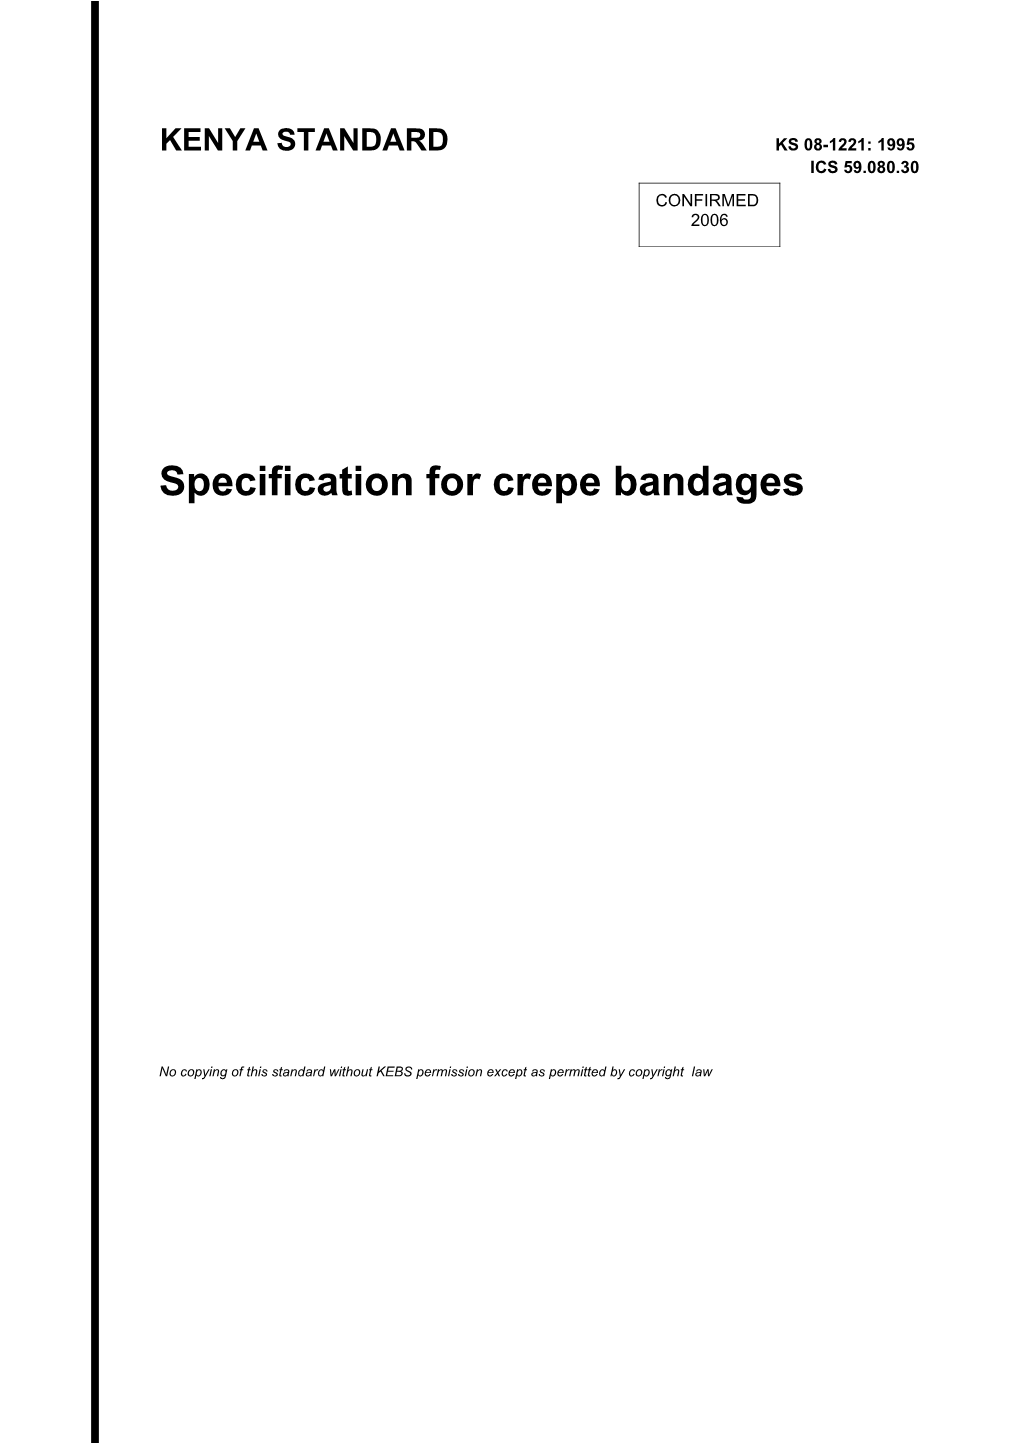 Specification for Crepe Bandages